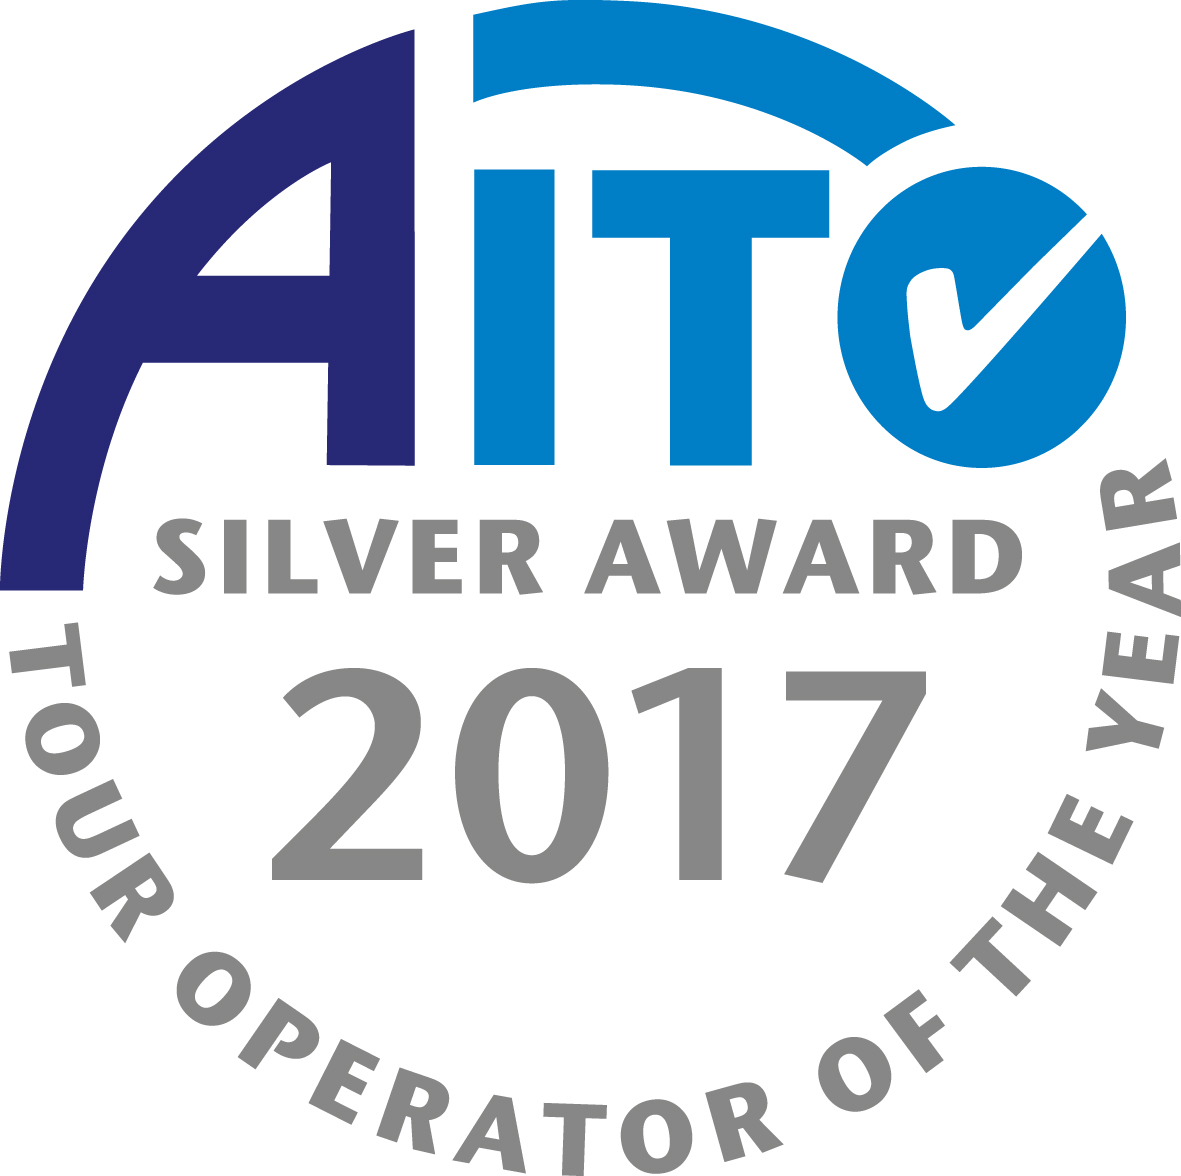 AITO - Tour Operator of the year